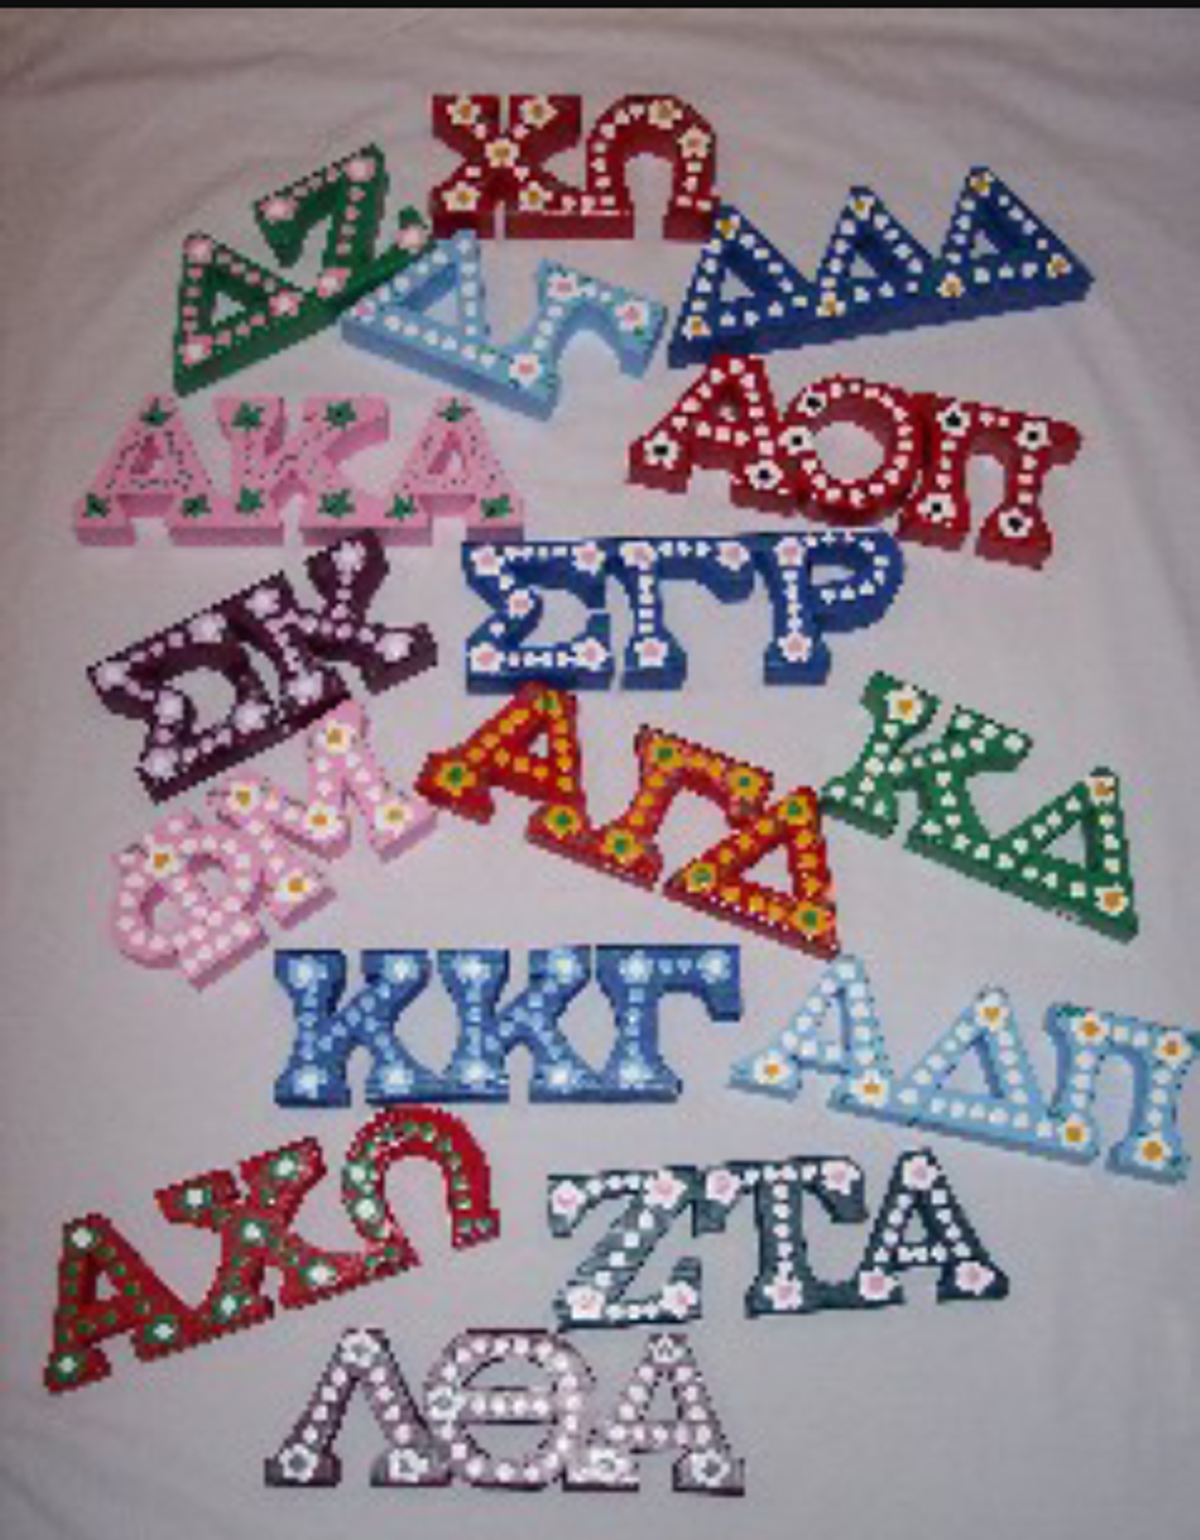 5 Reasons You Should Consider Going Greek